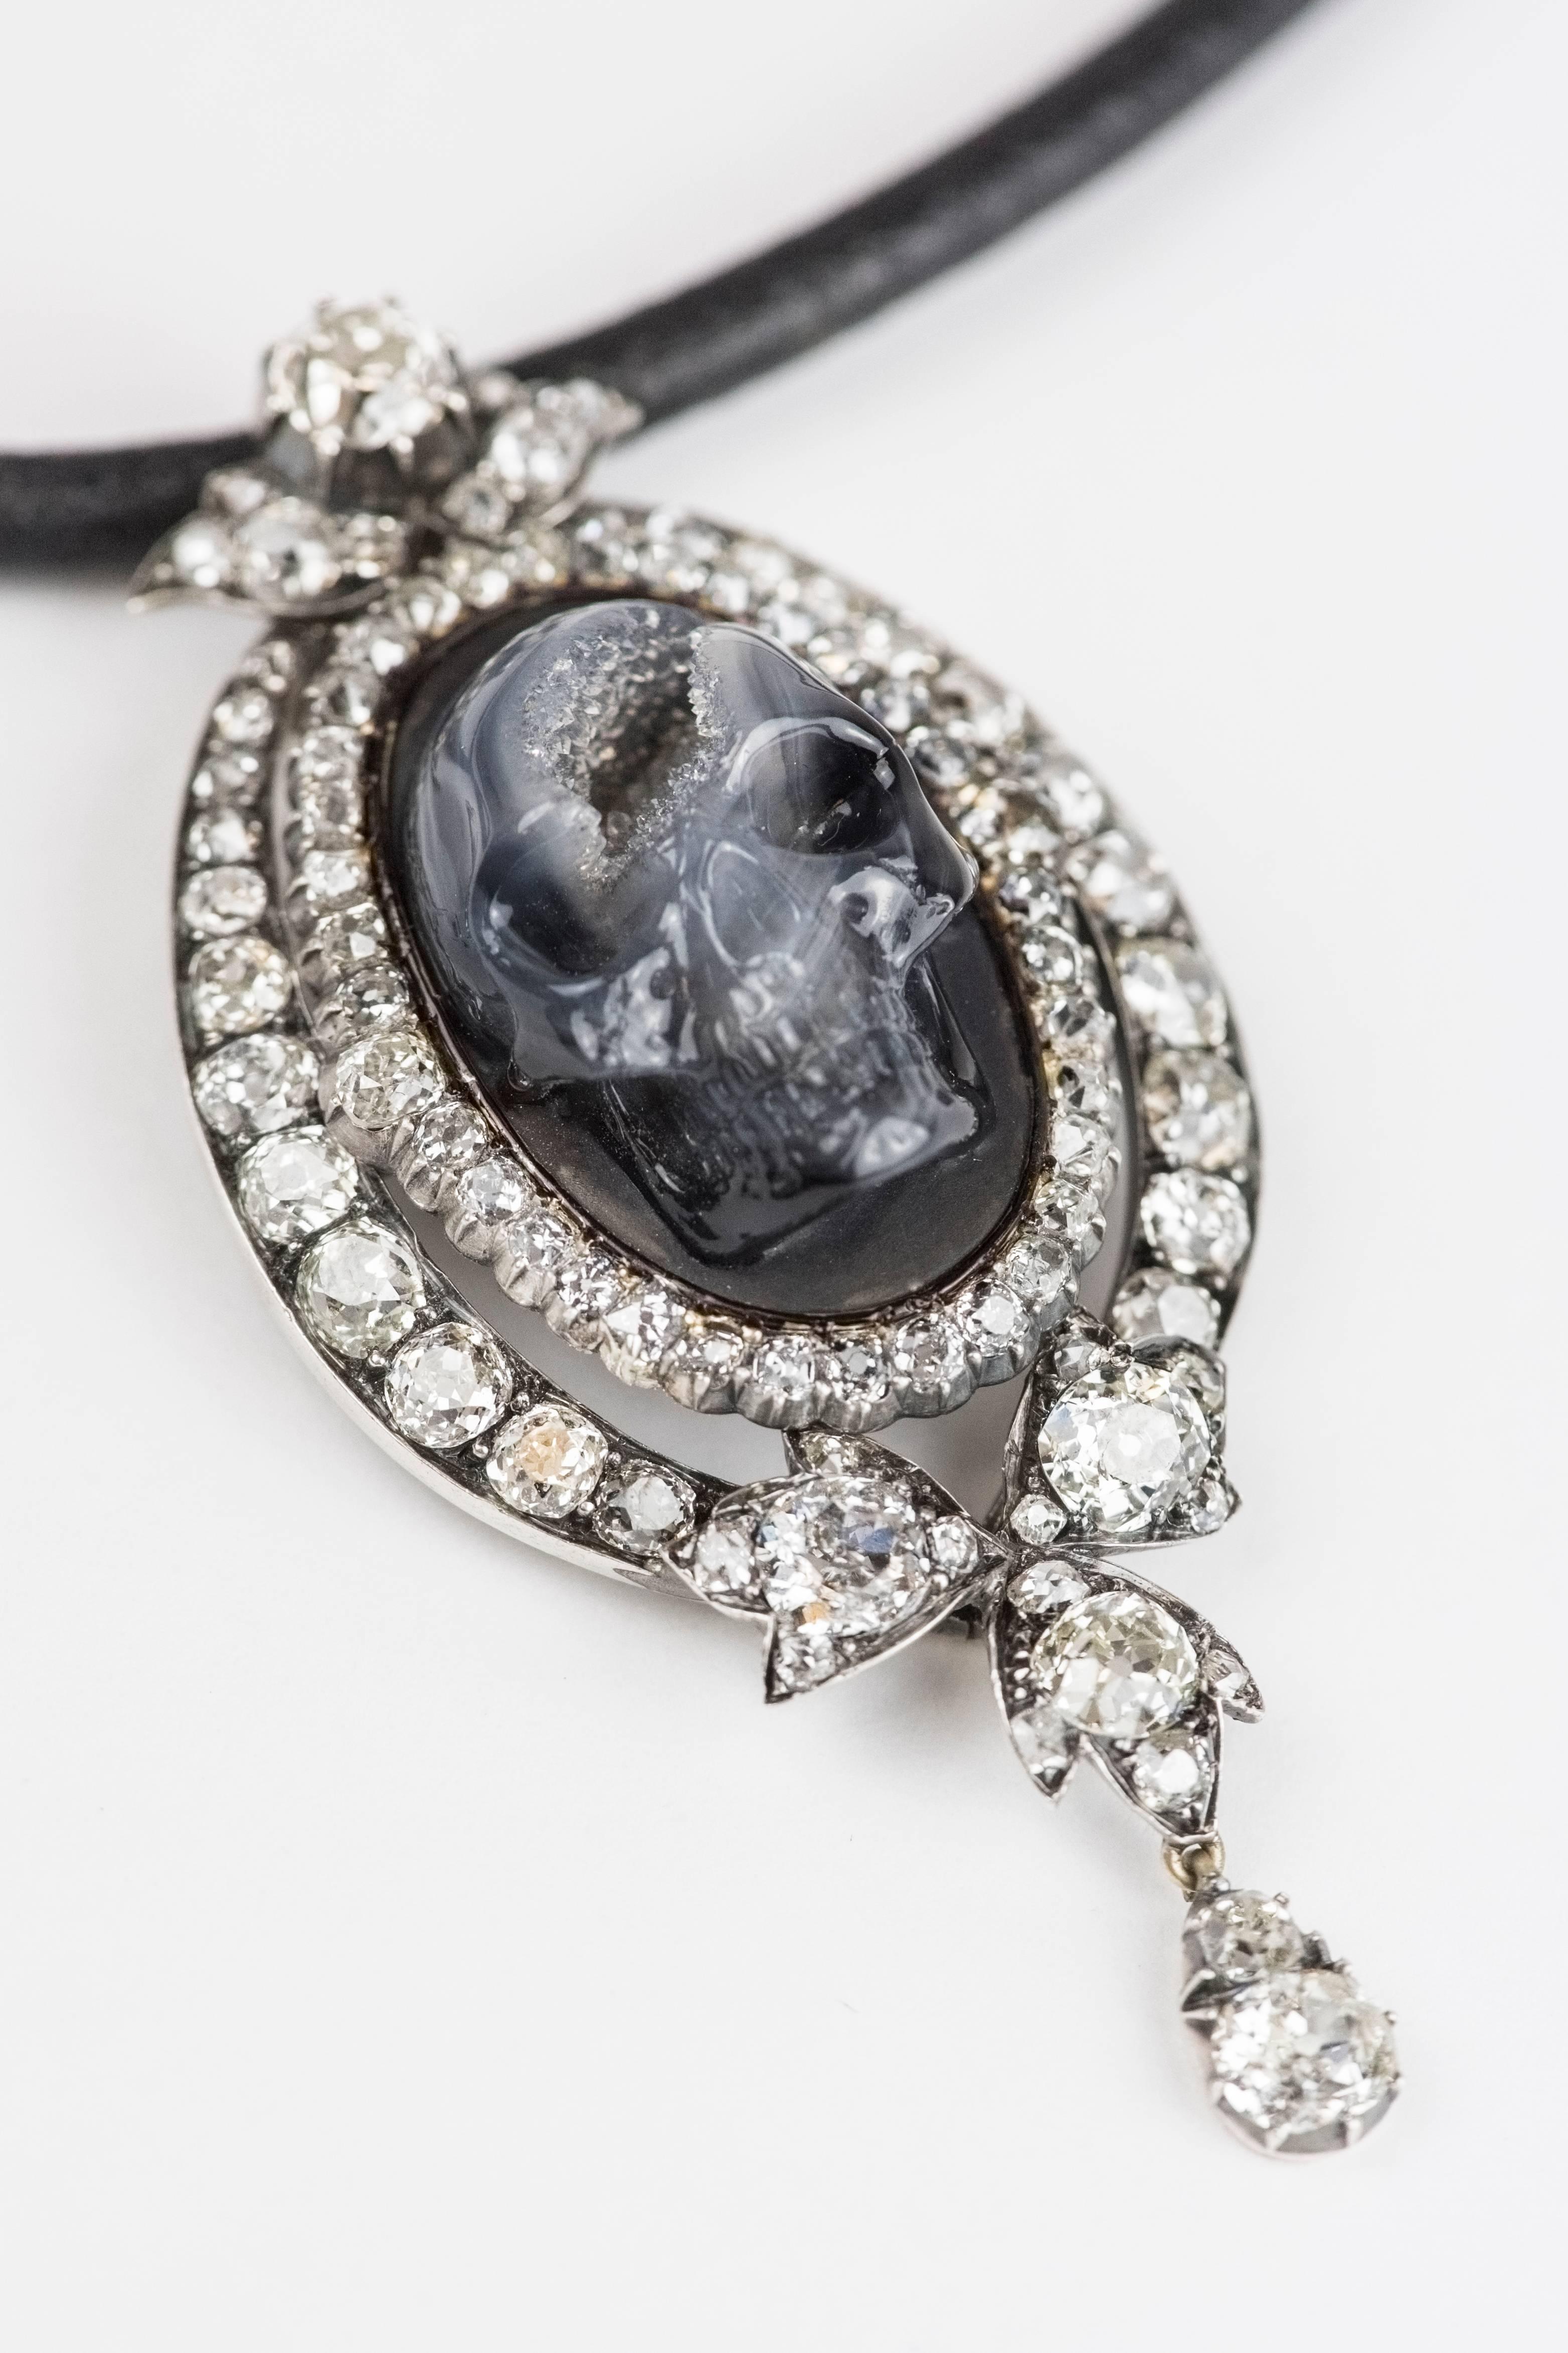 Antique Diamond Carved Drusy Agate Geode Skull Pendant Necklace 2